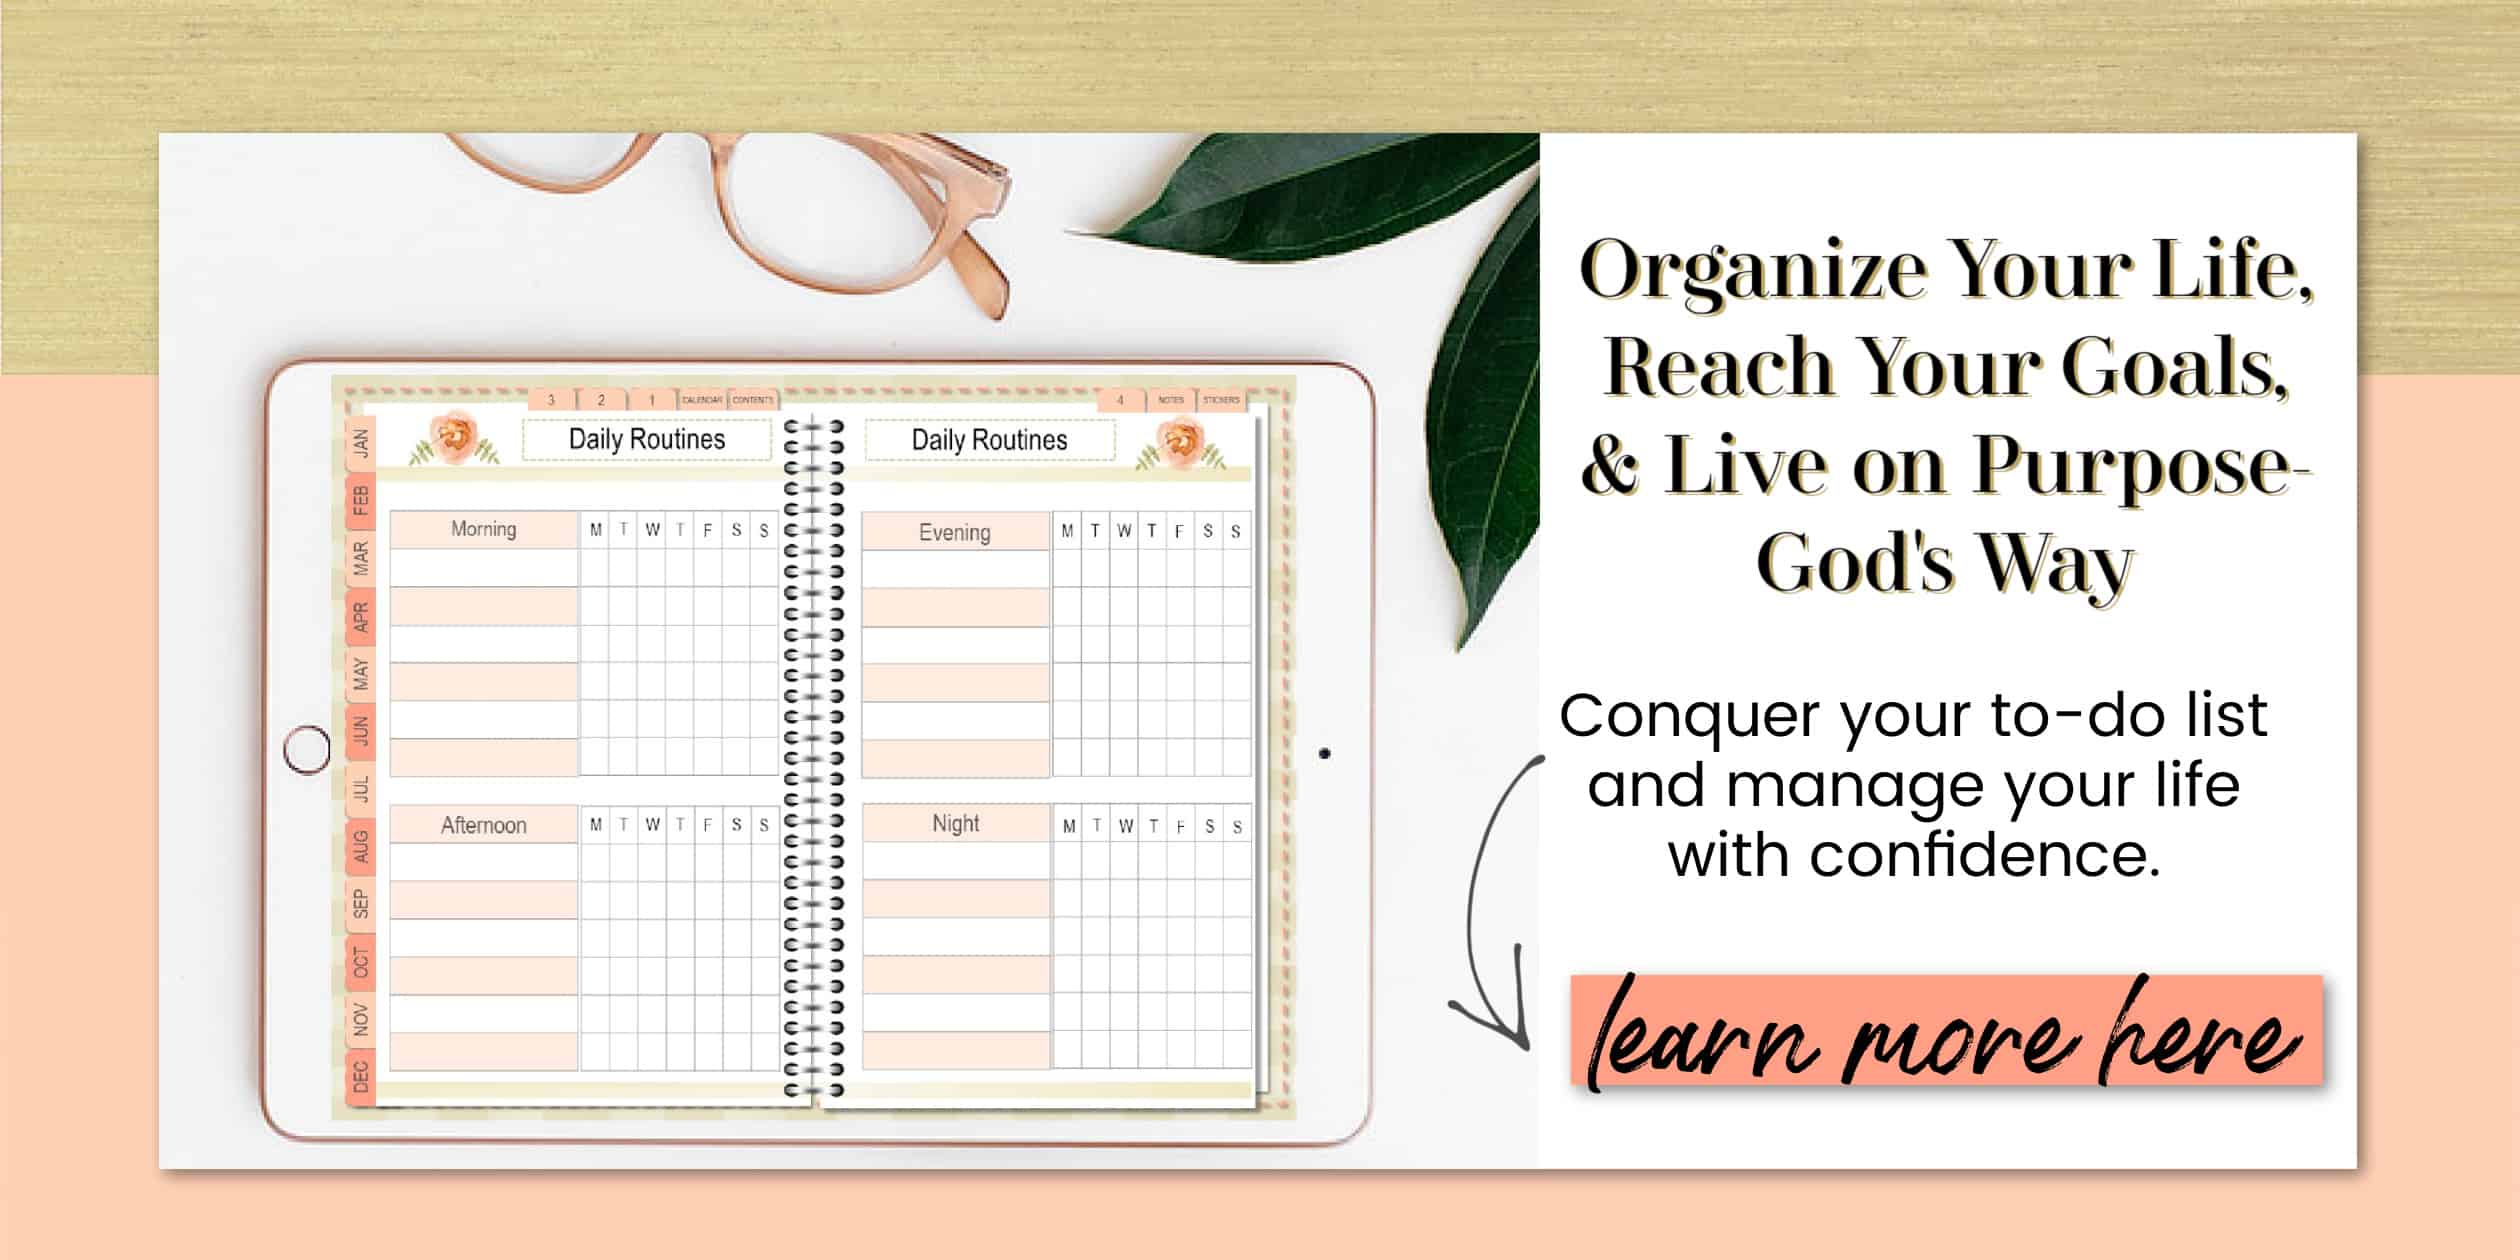 Abundant Life Digital Planner on the iPad text- organize your life, reach your goals, and live on purpose